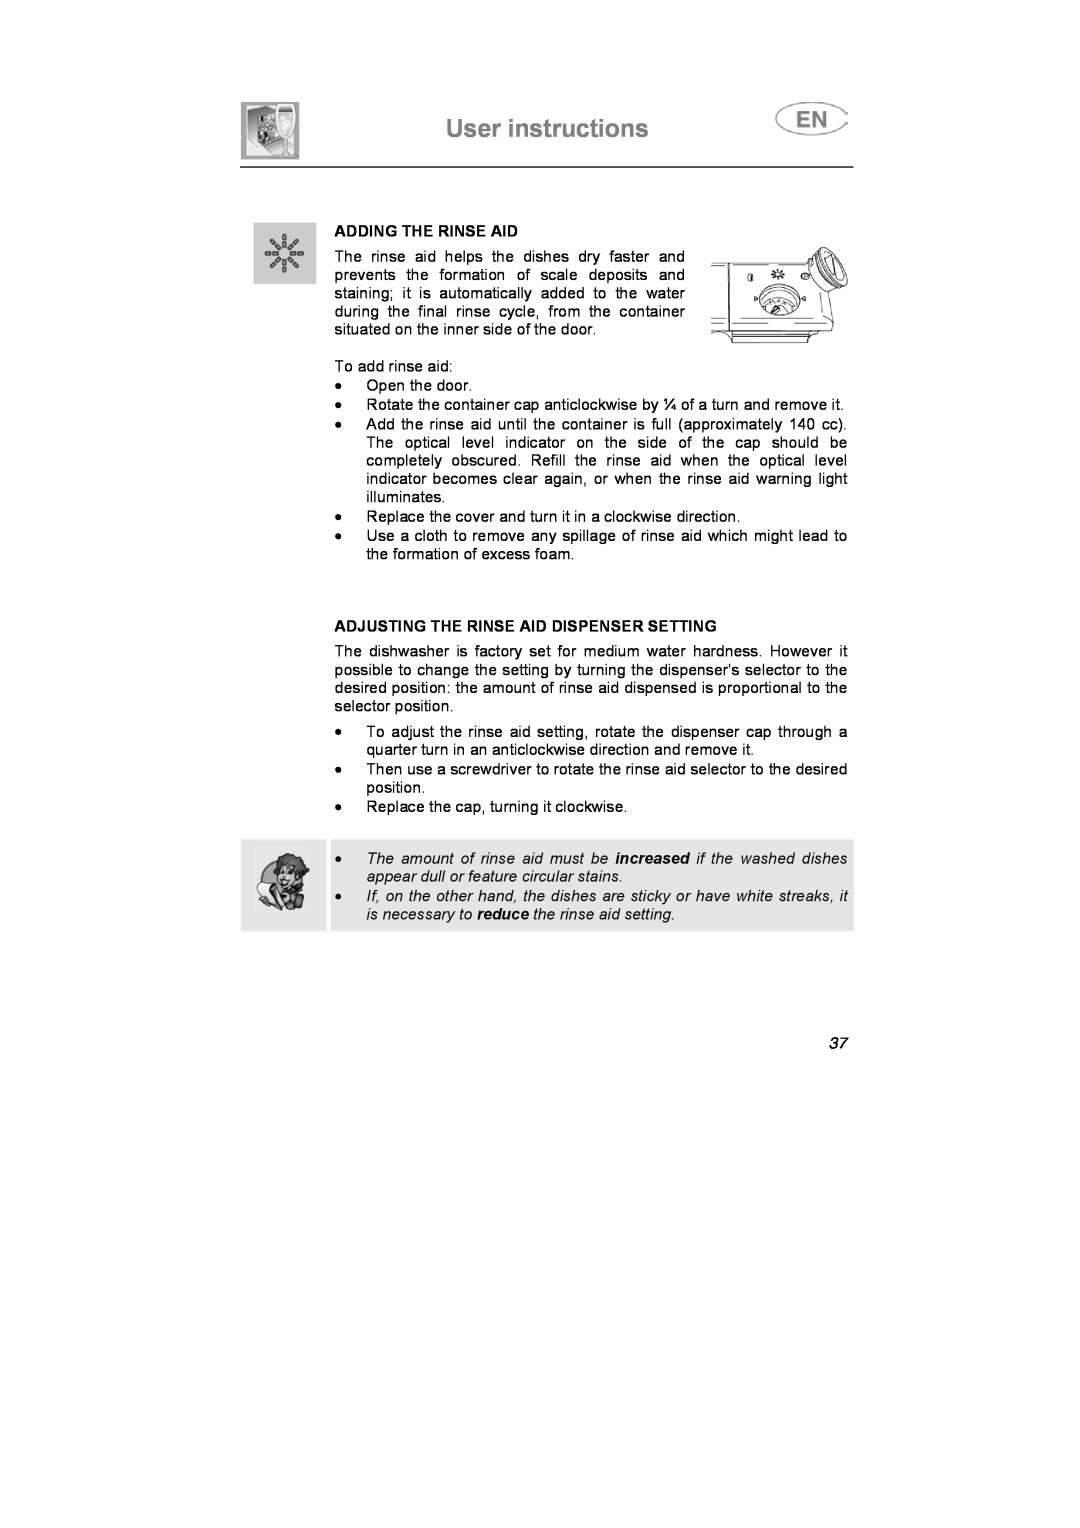 CDA VW80 manual Adding The Rinse Aid, Adjusting The Rinse Aid Dispenser Setting, User instructions 